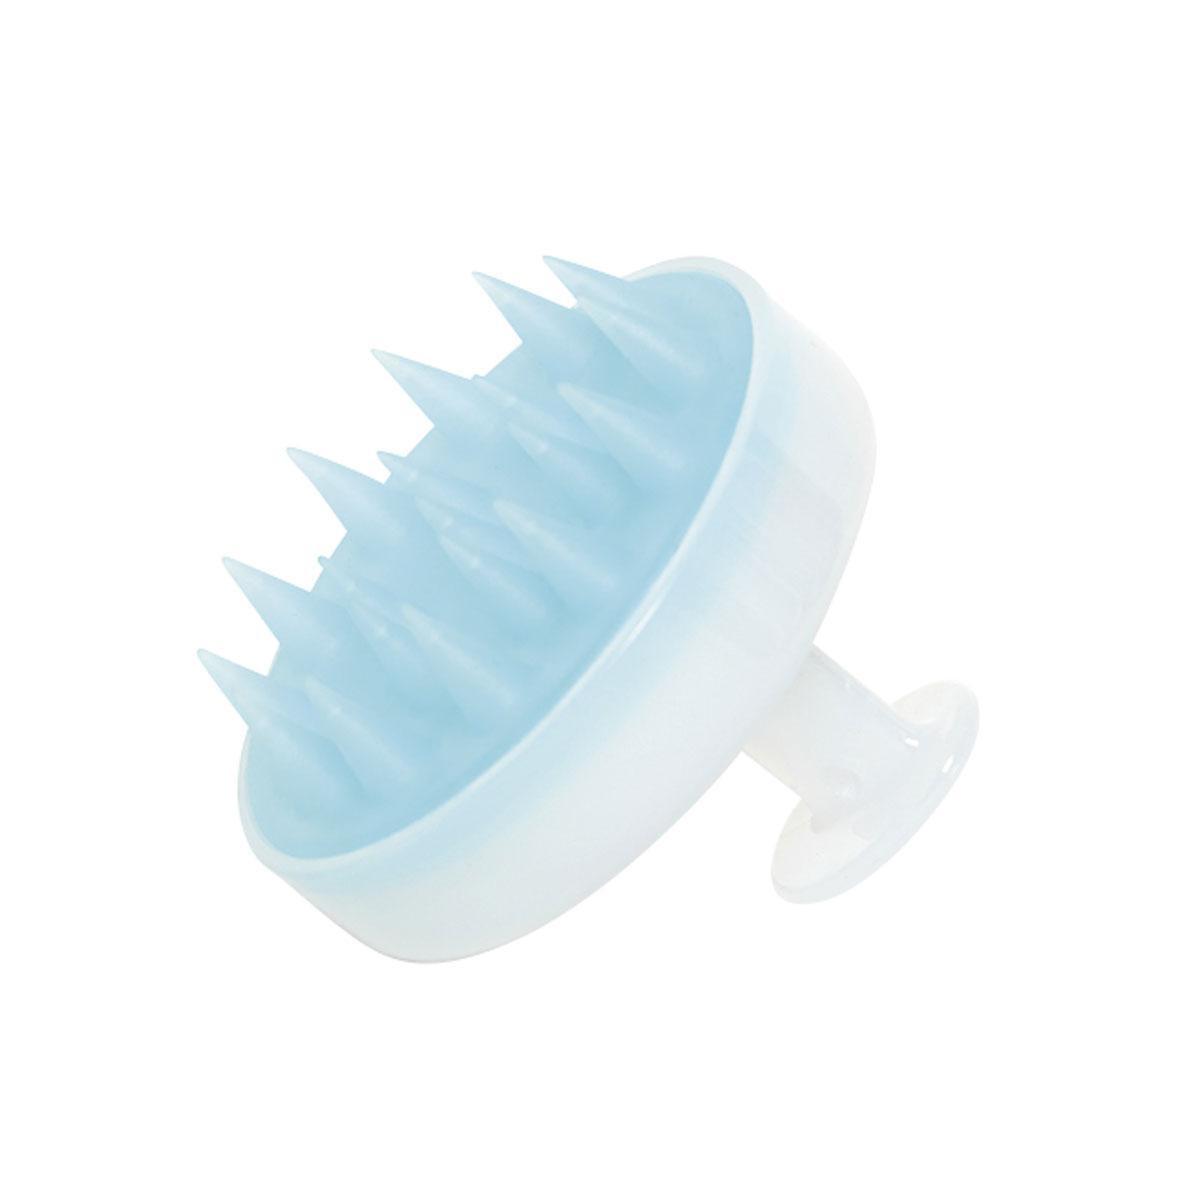 Shower Brush en silicone, Hairstory, 12,90 euros (disponible chez Beauty by Kroonen).